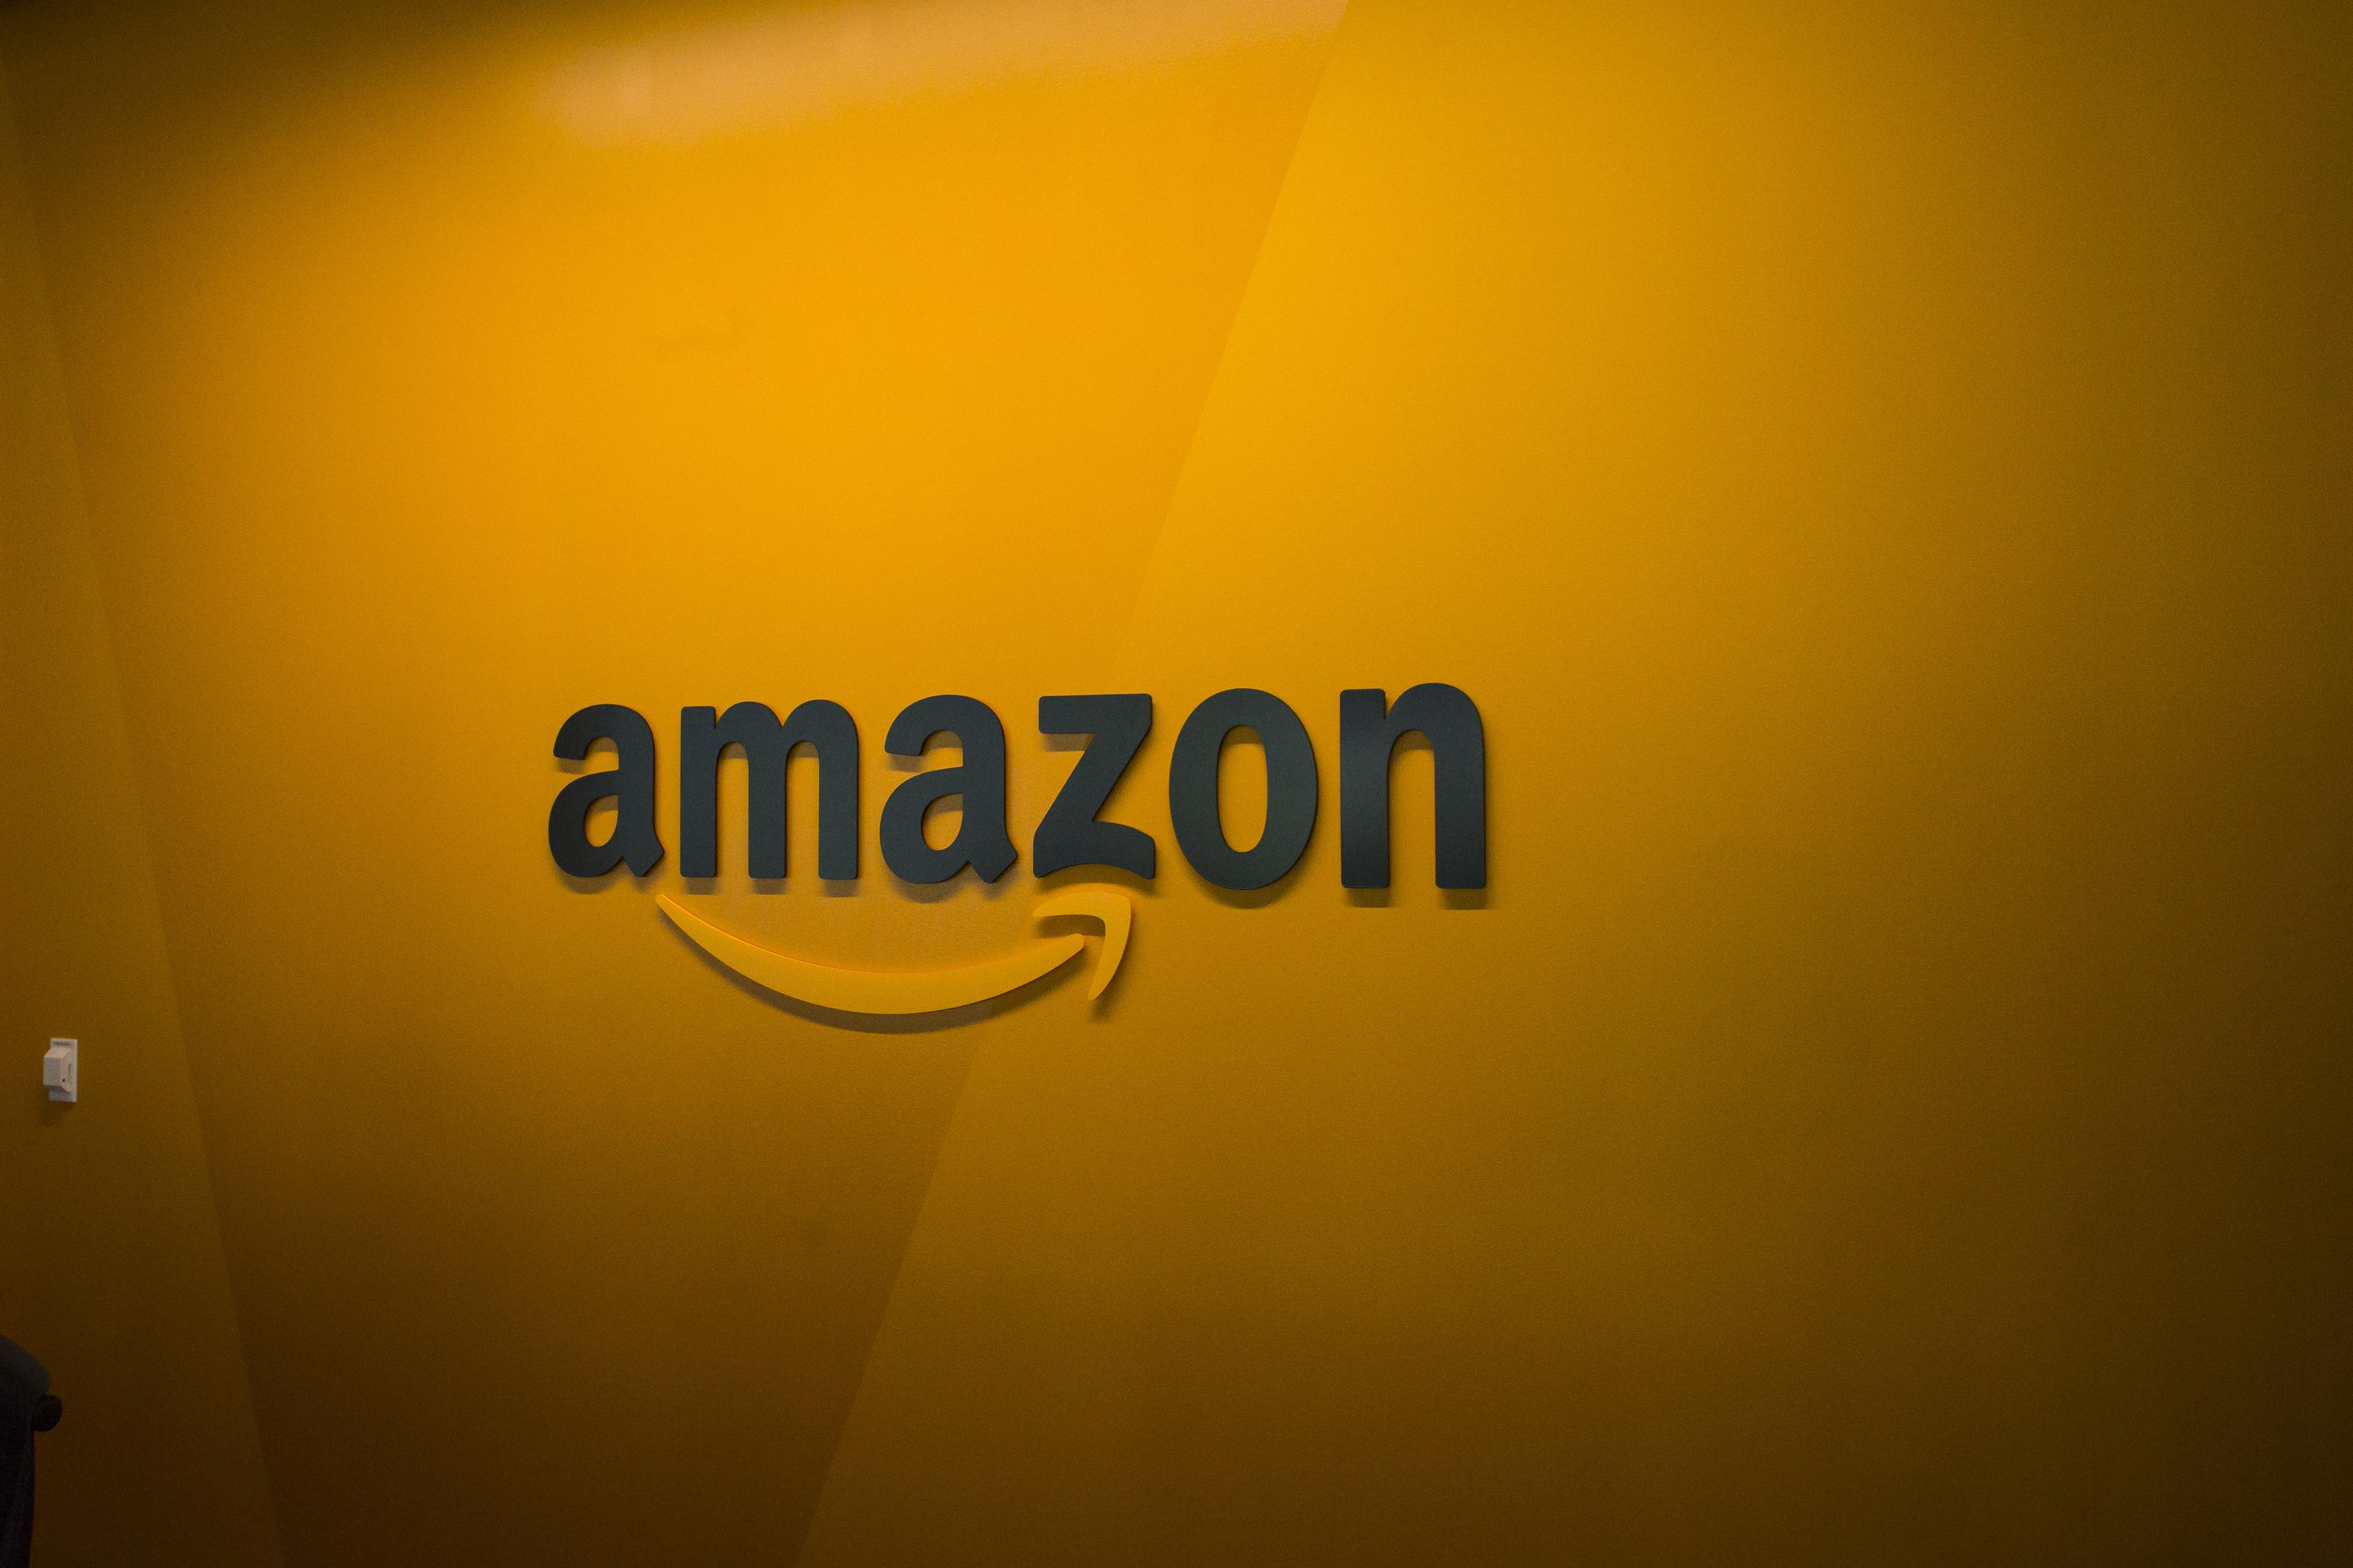 Amazon is replacing Prime Now with it’s main website and app